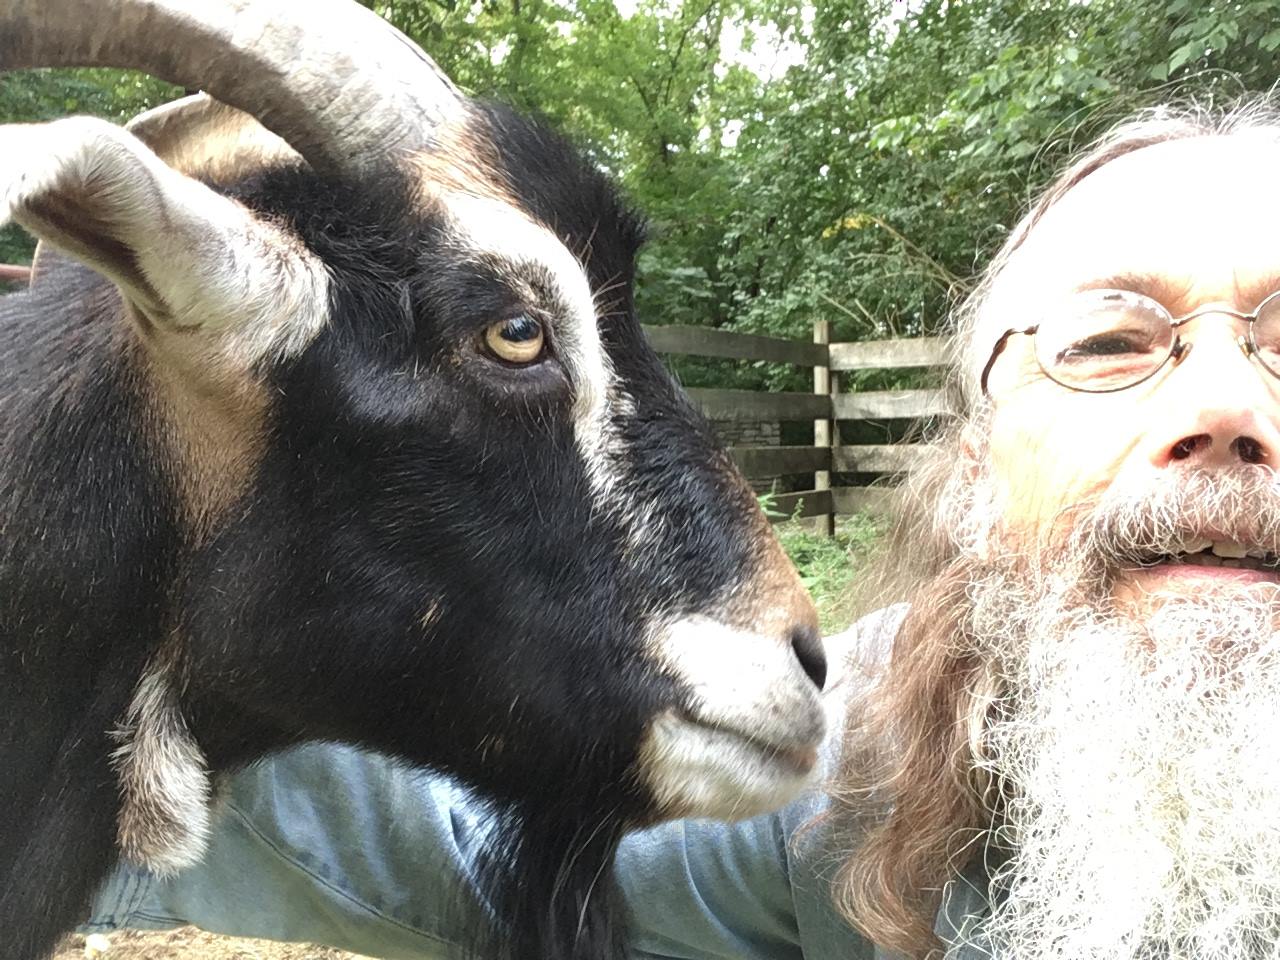 A goat at the Sanctuary.